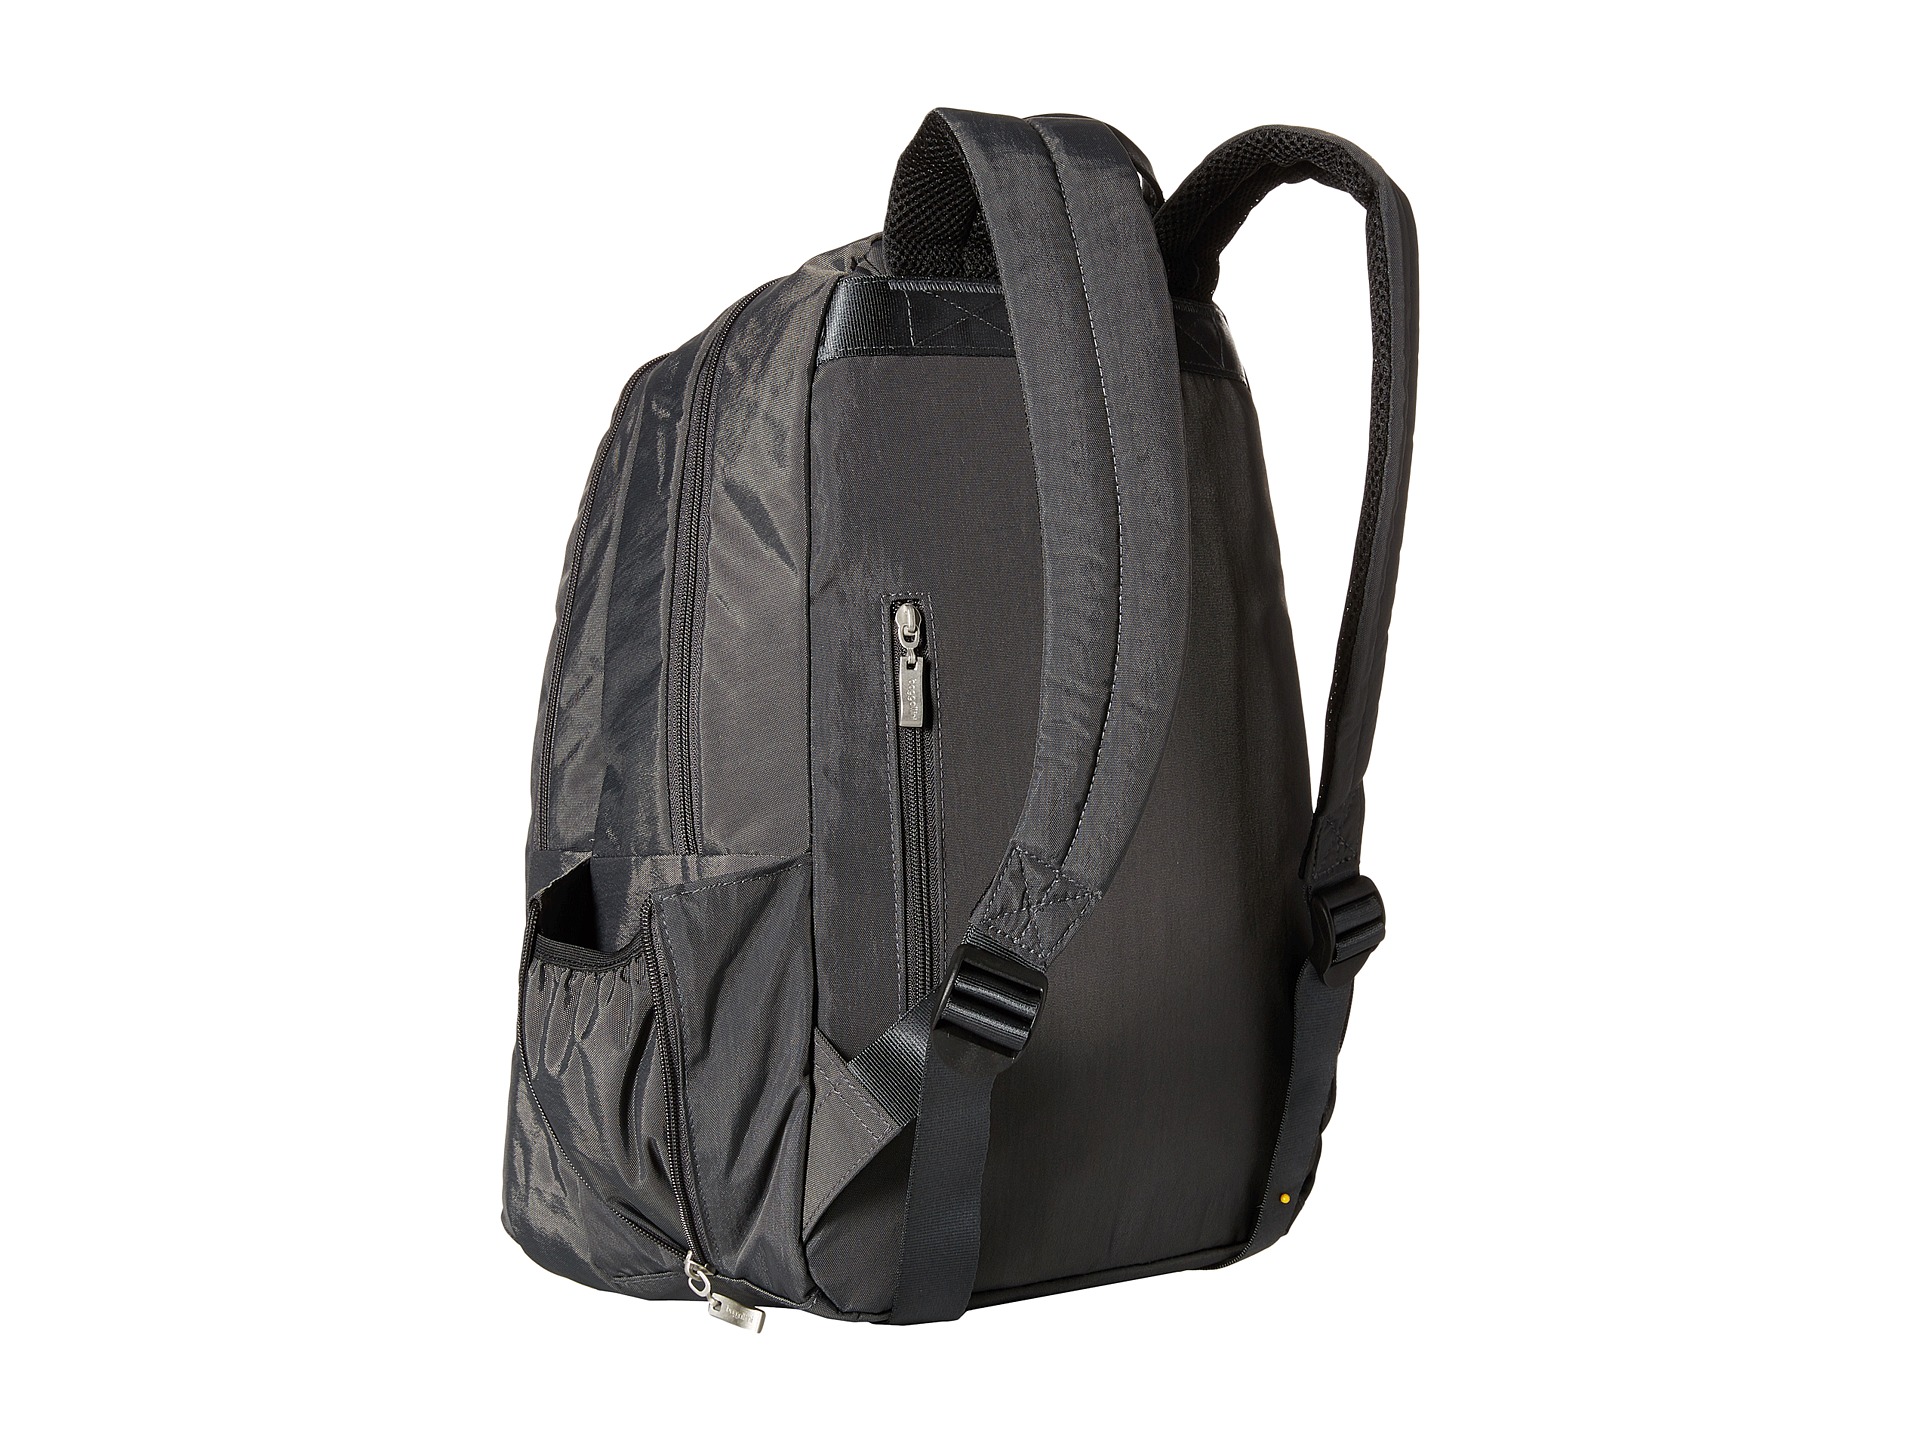 Baggallini Step Backpack Charcoal - Zappos.com Free Shipping BOTH Ways